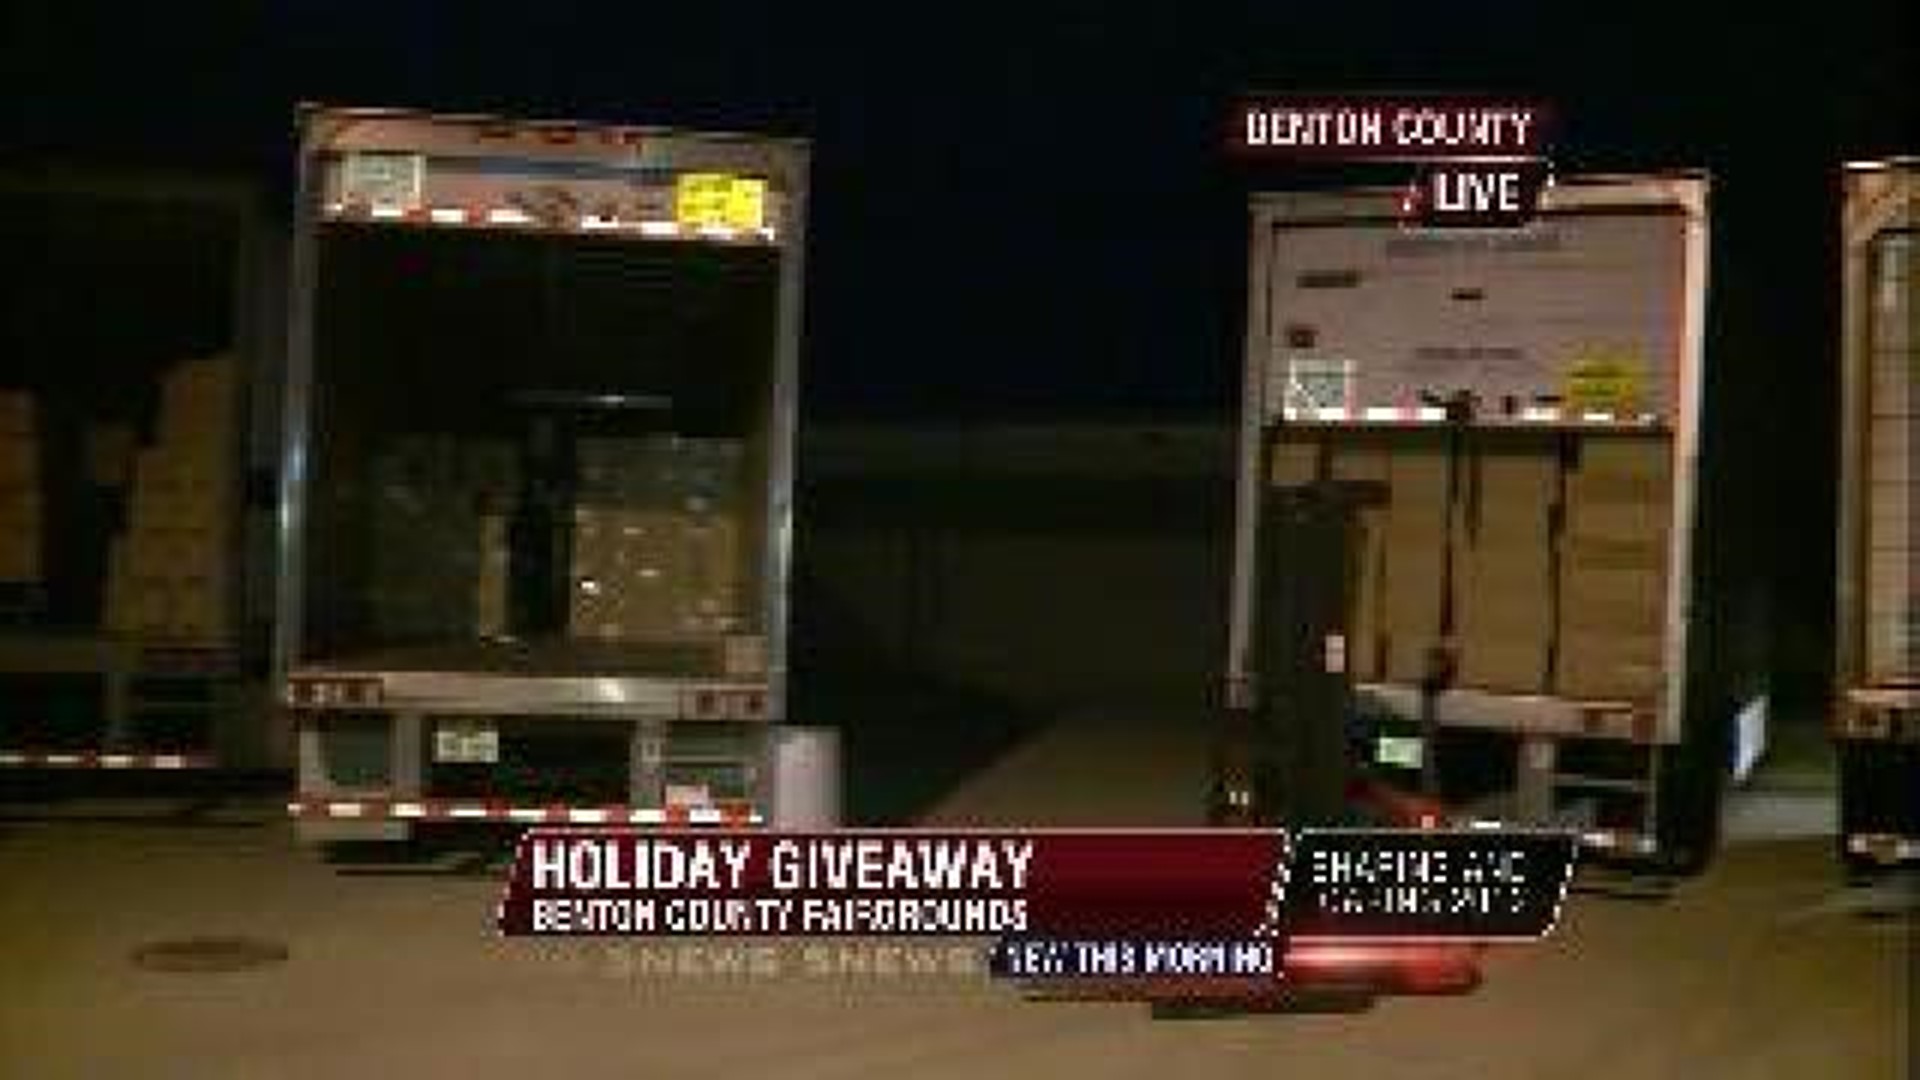 VIDEO: Holiday Giveaway, Sharing and Caring